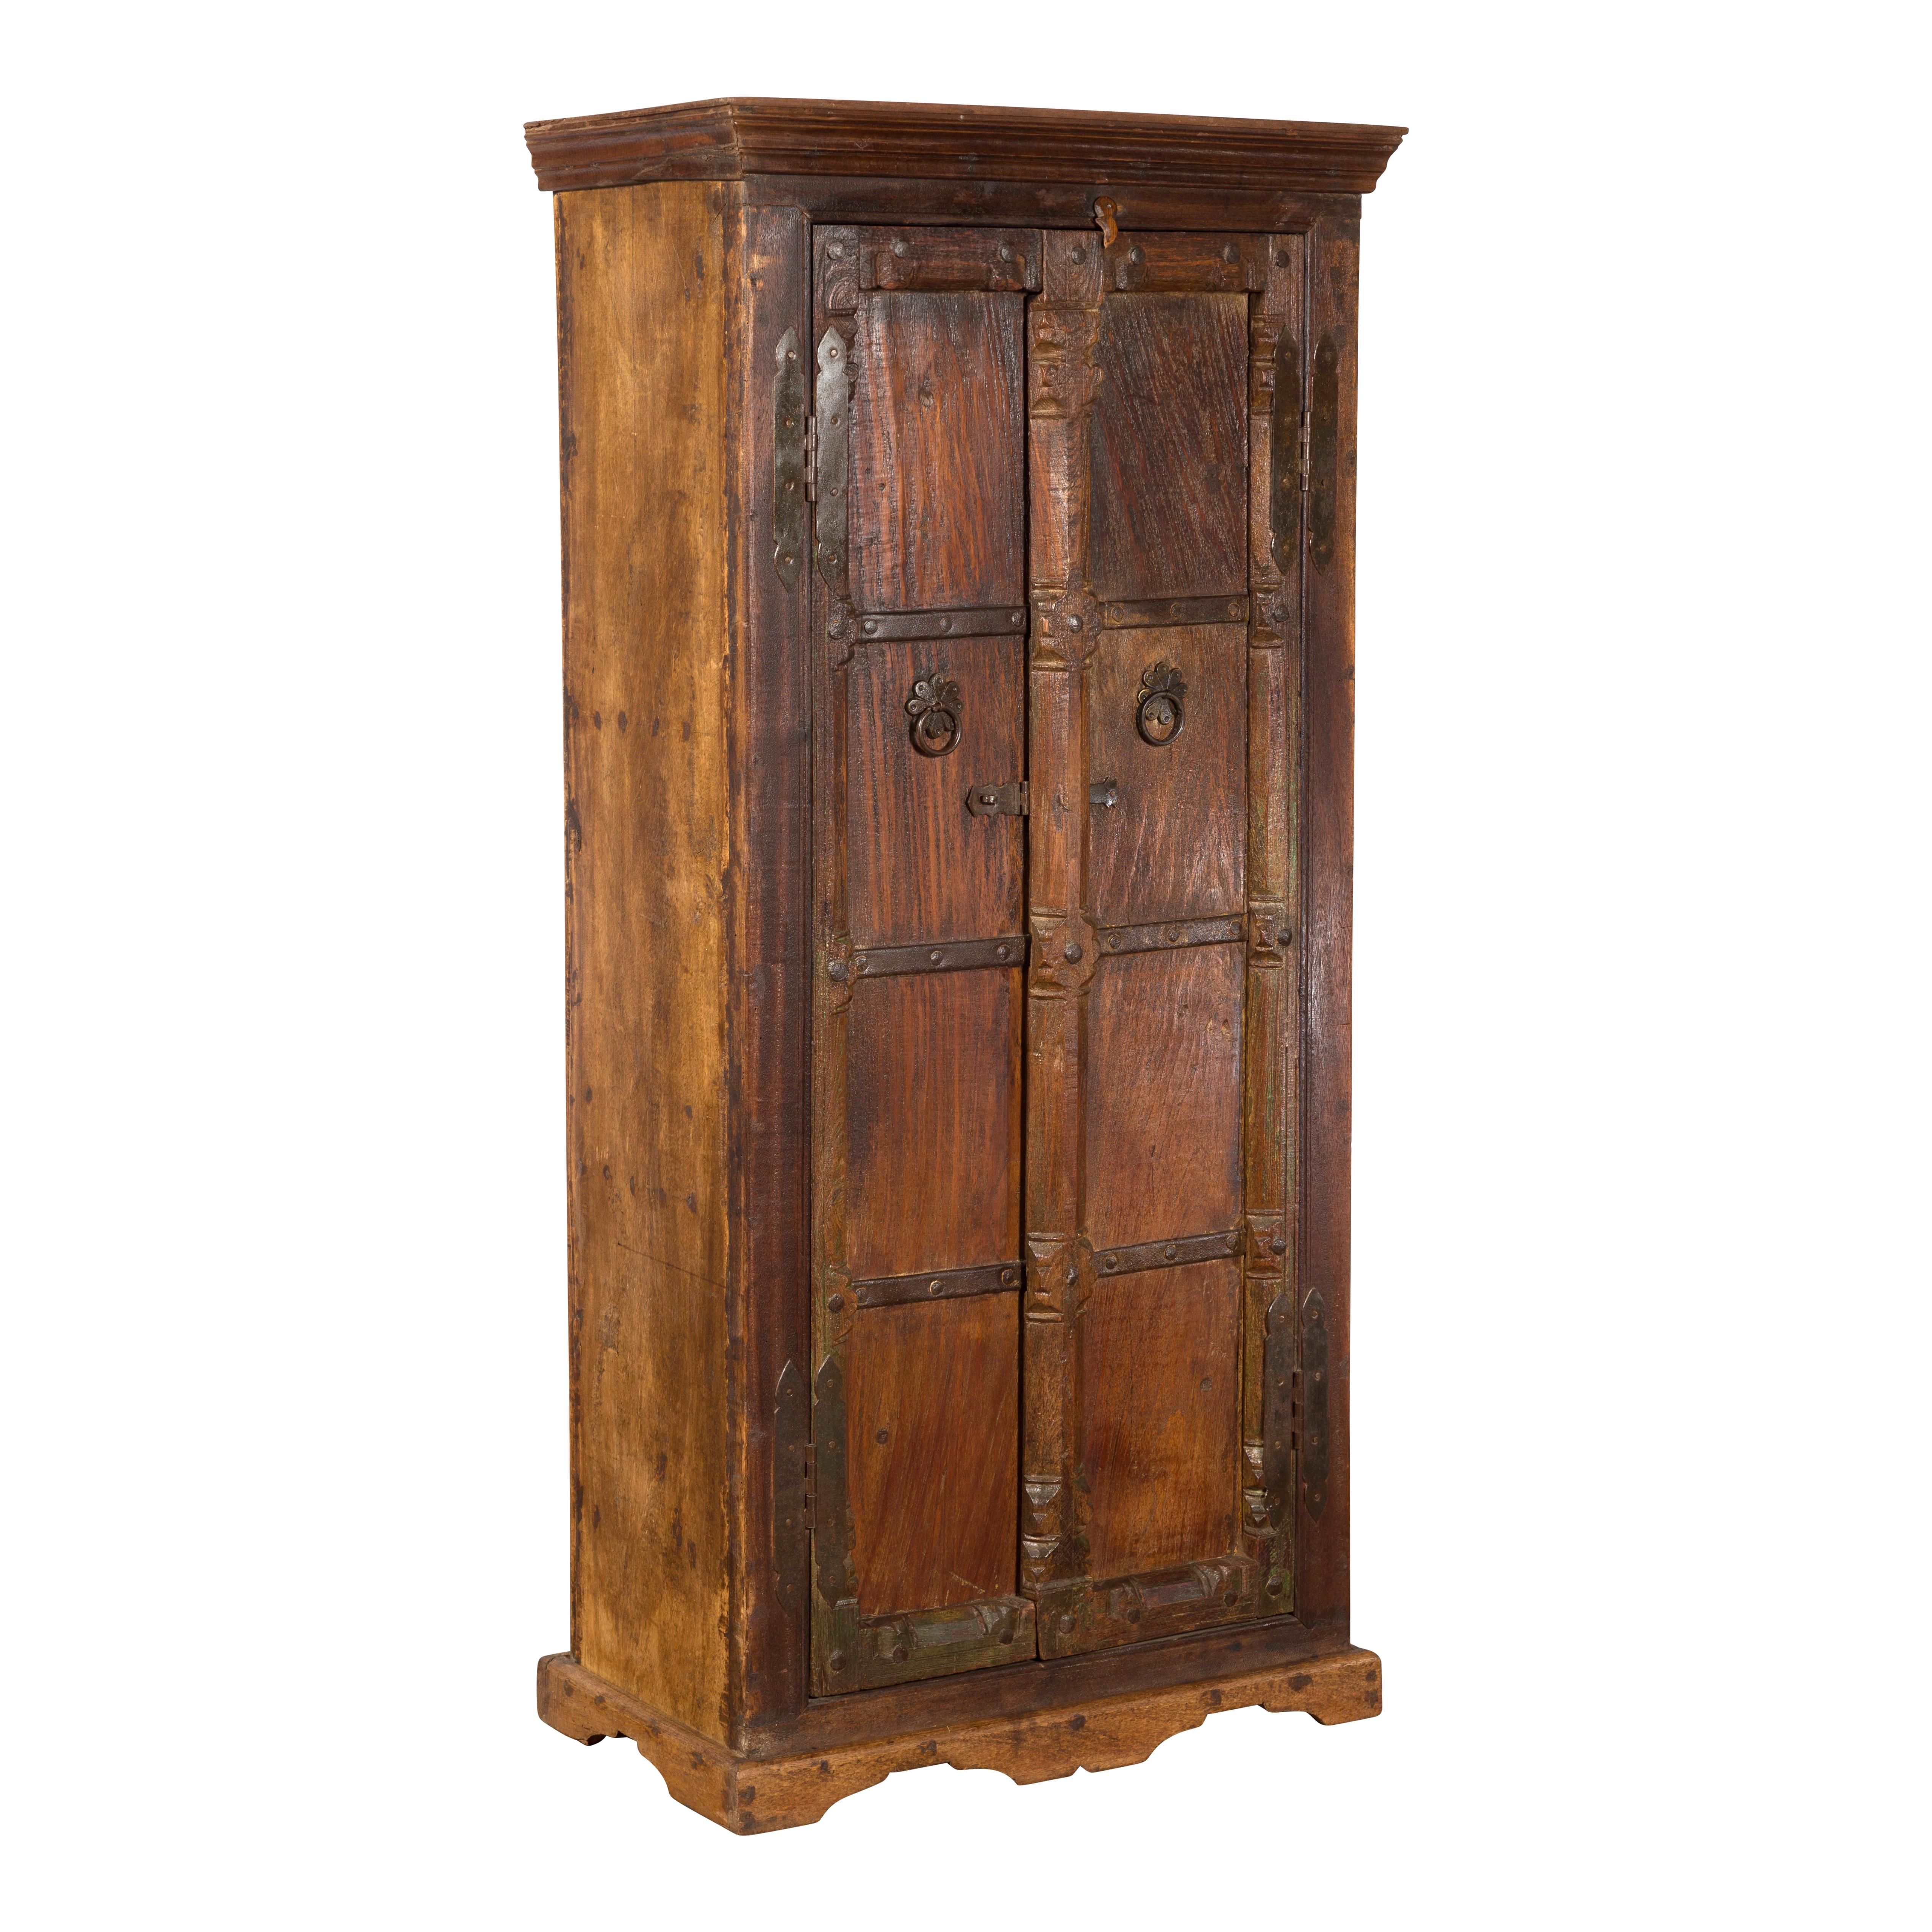 Indian 19th Century Gujarat Armoire with Iron Braces and Carved Half Columns For Sale 12